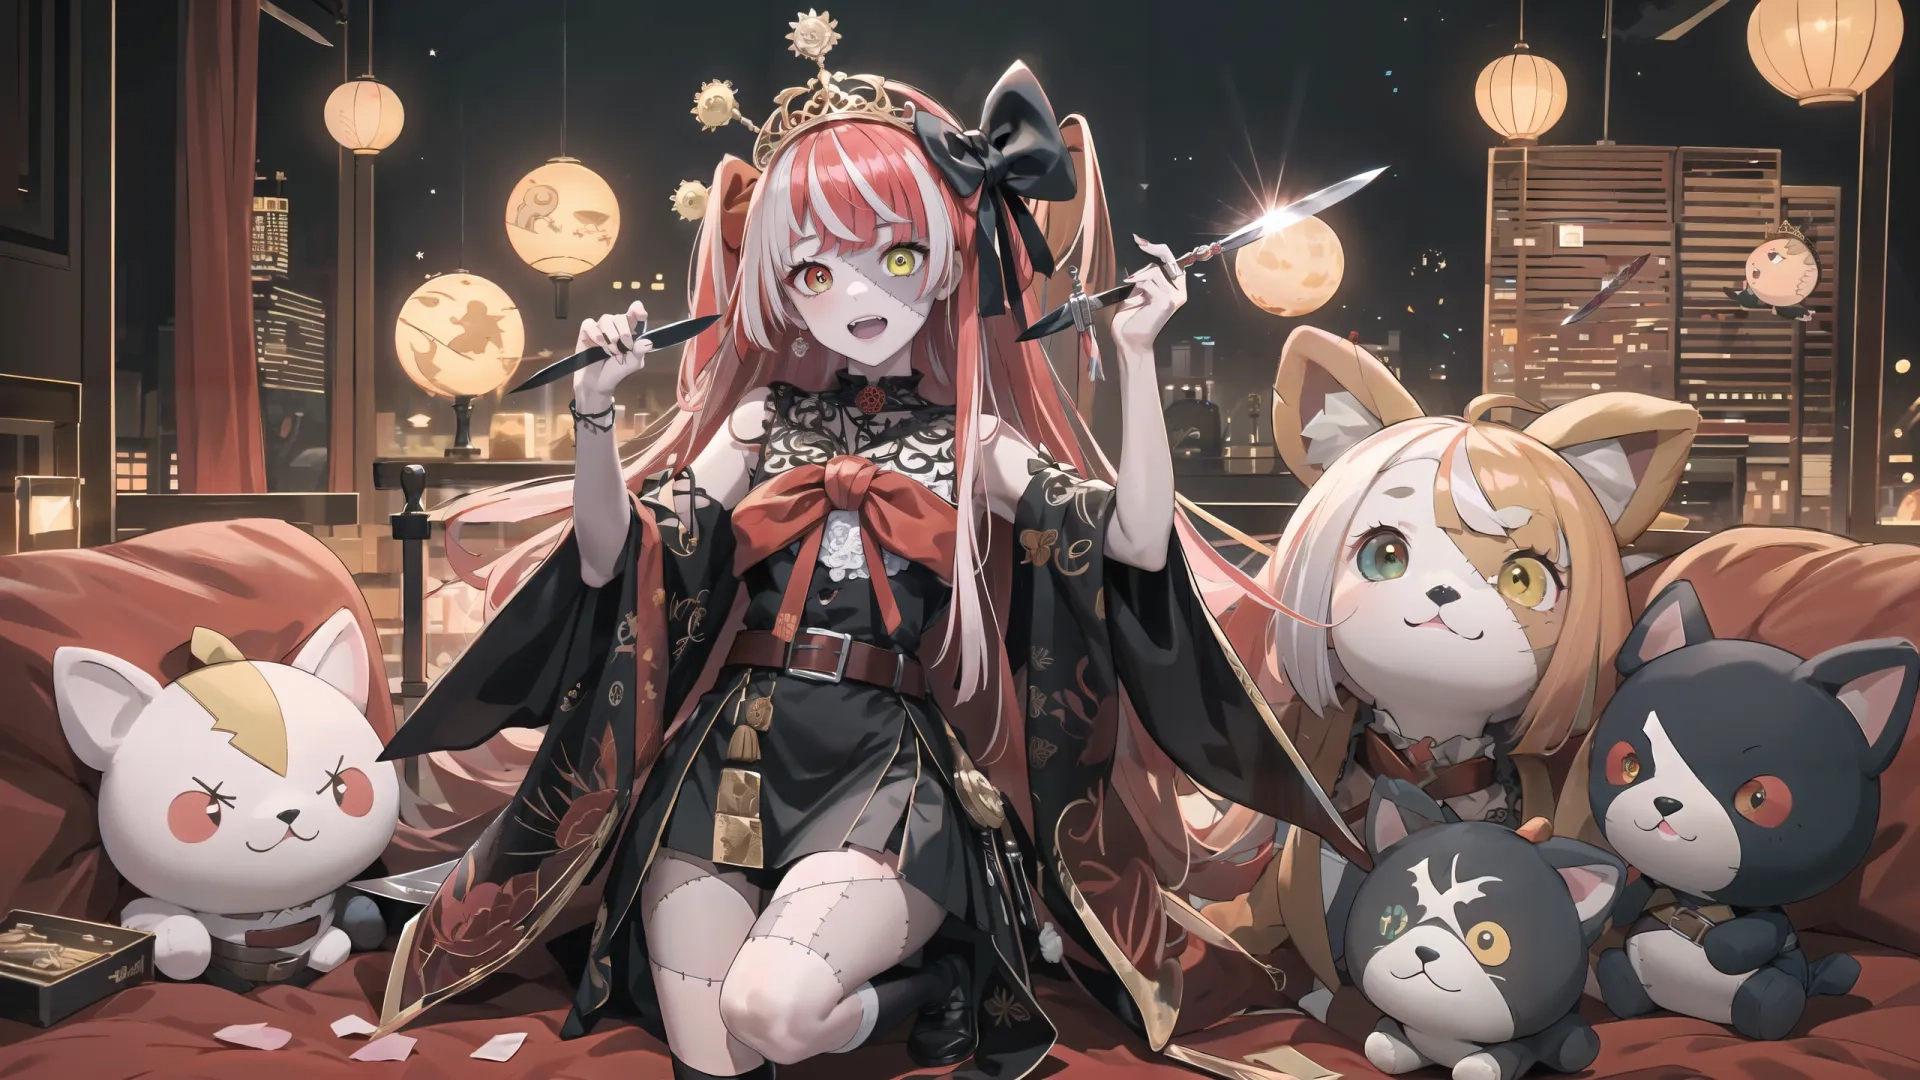 the anime character has five cats behind her, as if in a game or someone is not playing there for the game to be a story
